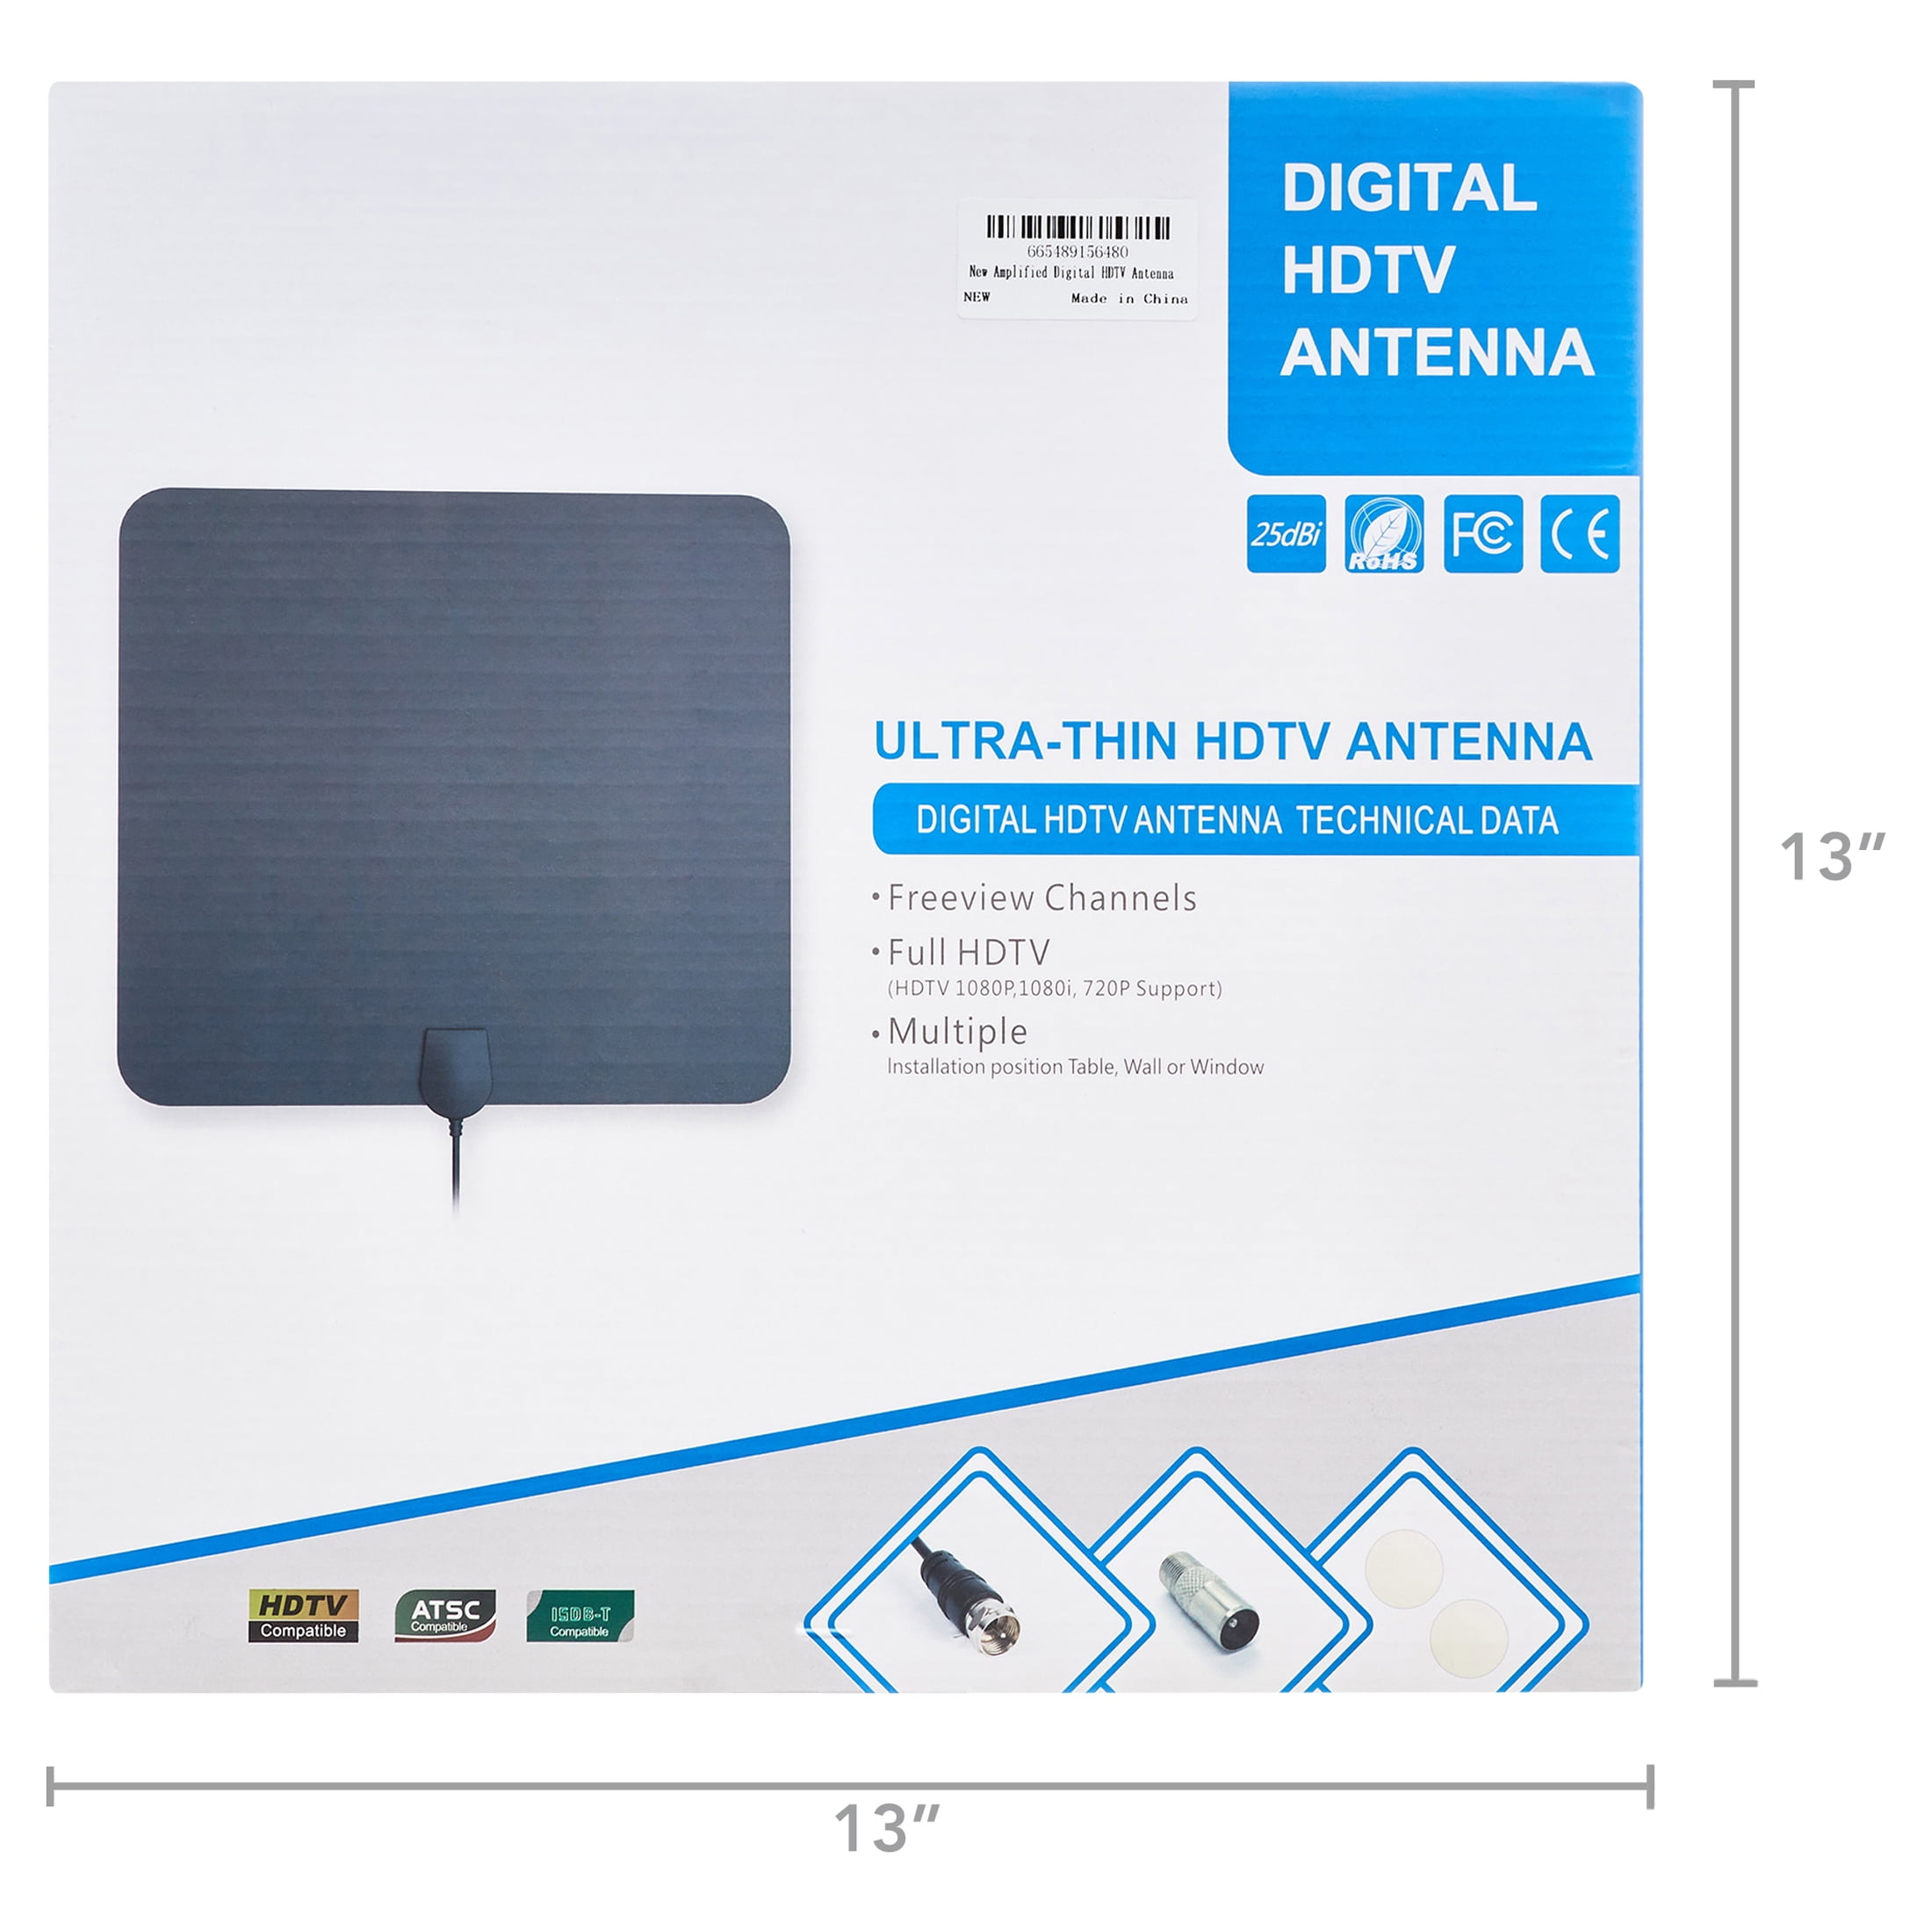 TV Antenna - HDTV Antenna Support 4K 1080P New Version up to 330 Miles  Range Digital Antenna for HDTV VHF UHF Freeview Channels Antenna with  Amplifier Signal Booster 16.5 ft Longer Coaxial